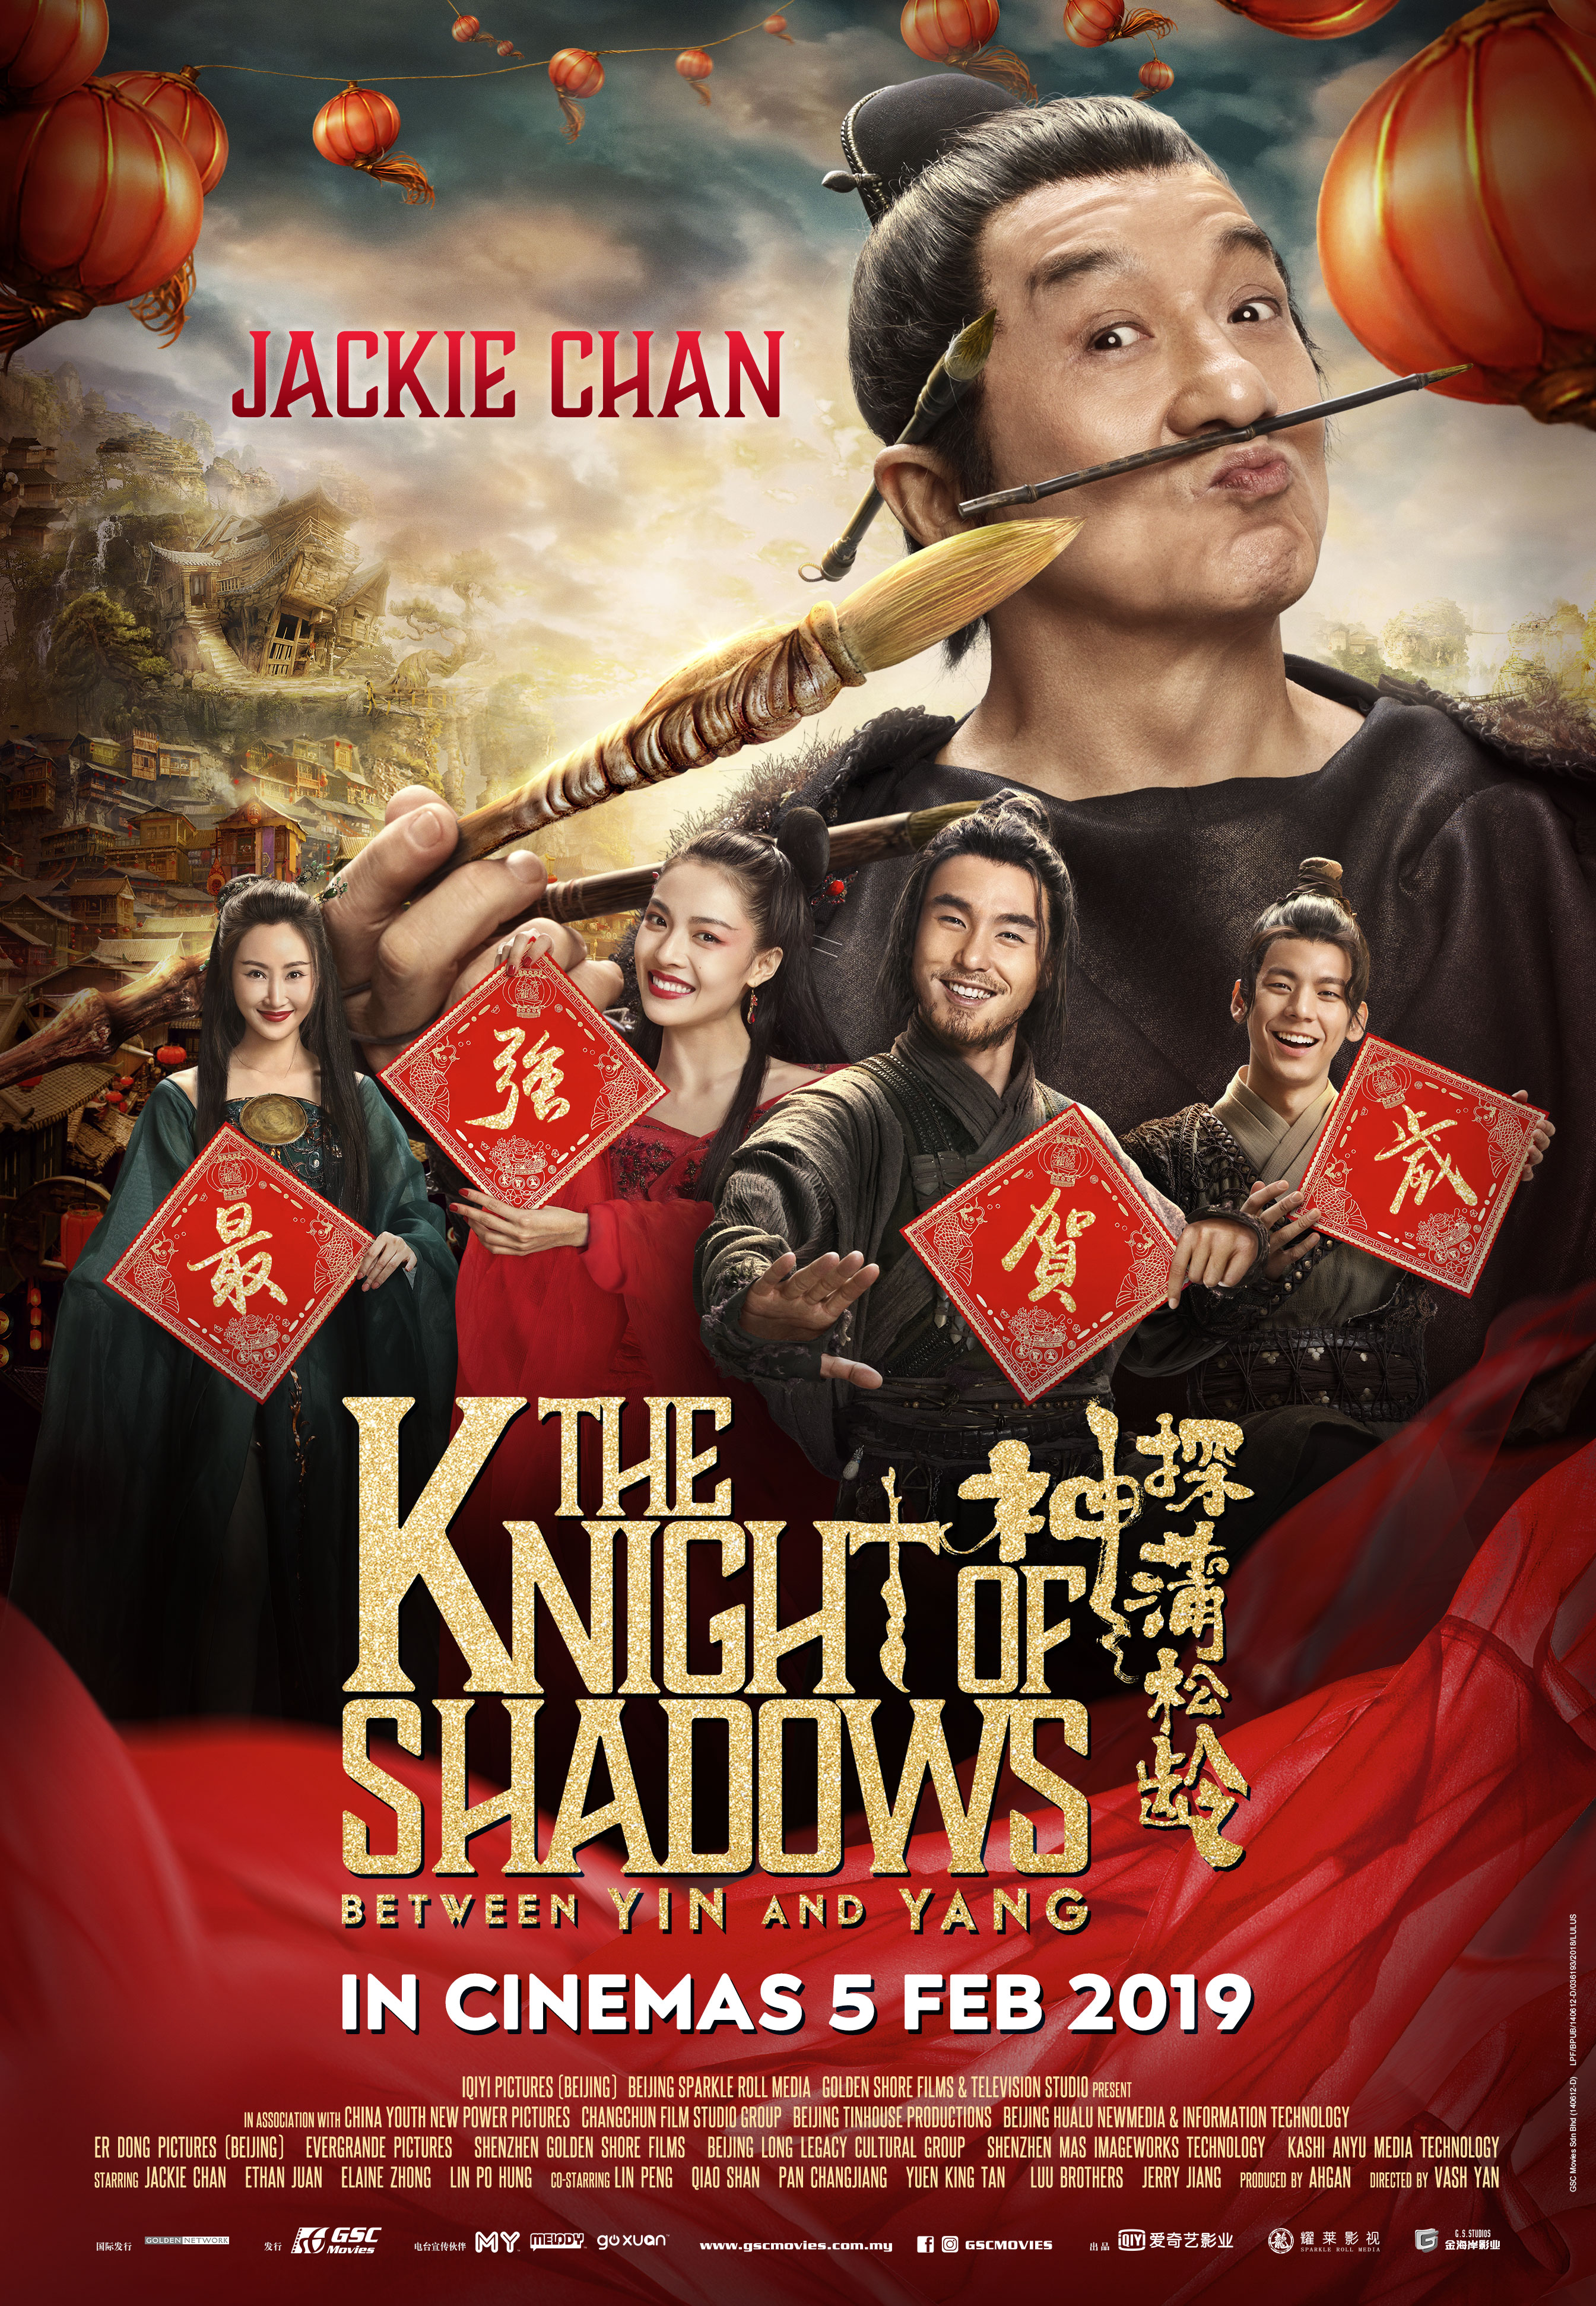 Jackie Chan is back with a movie on mythology! | GSC Movies